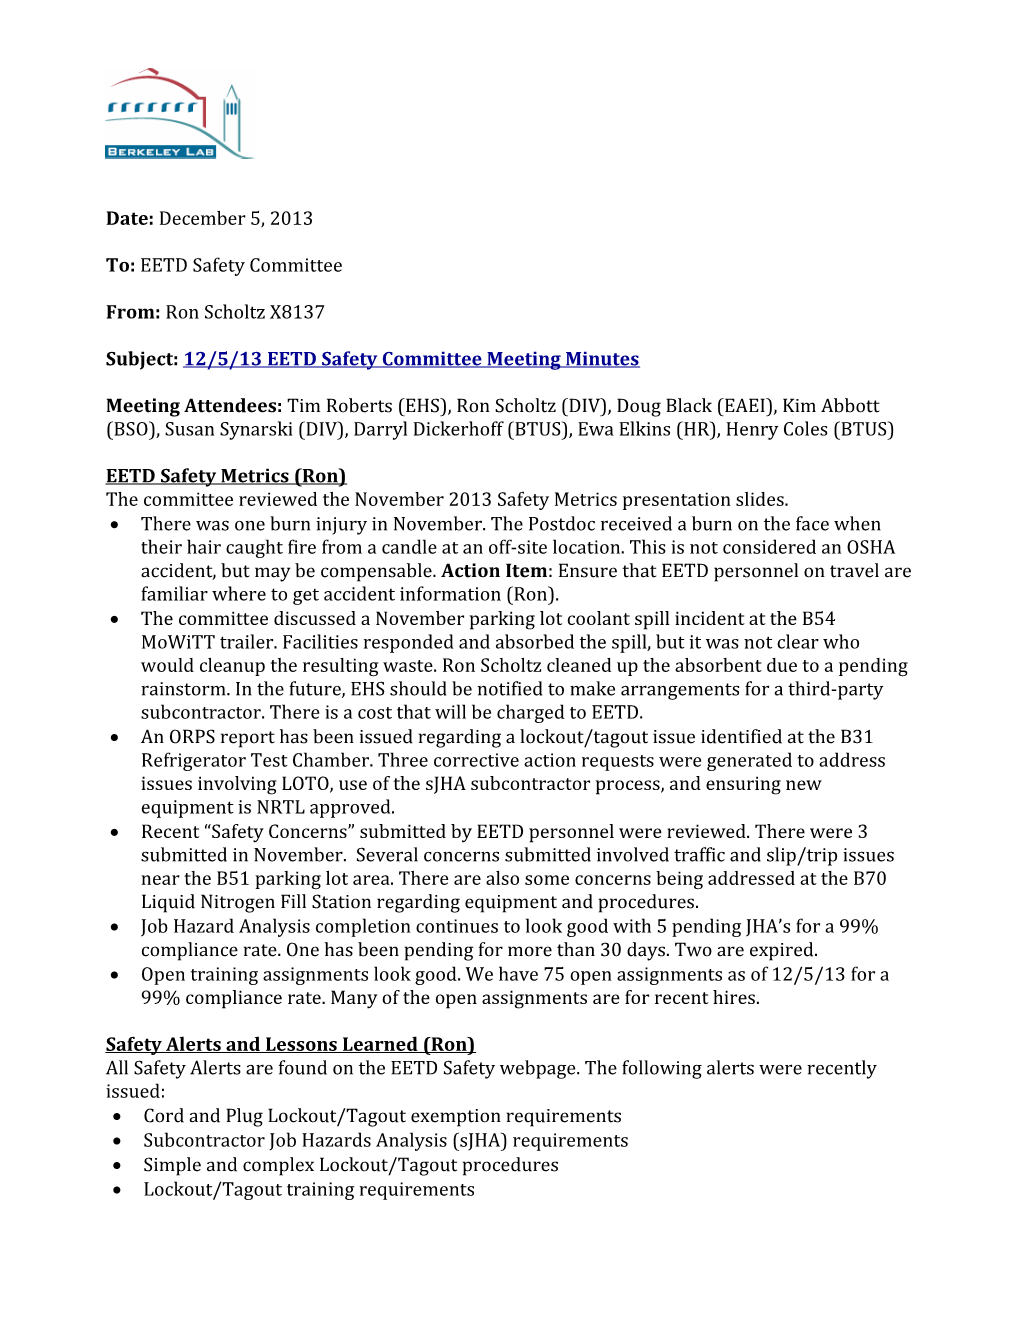 Subject: 12/5/13 EETD Safety Committee Meeting Minutes